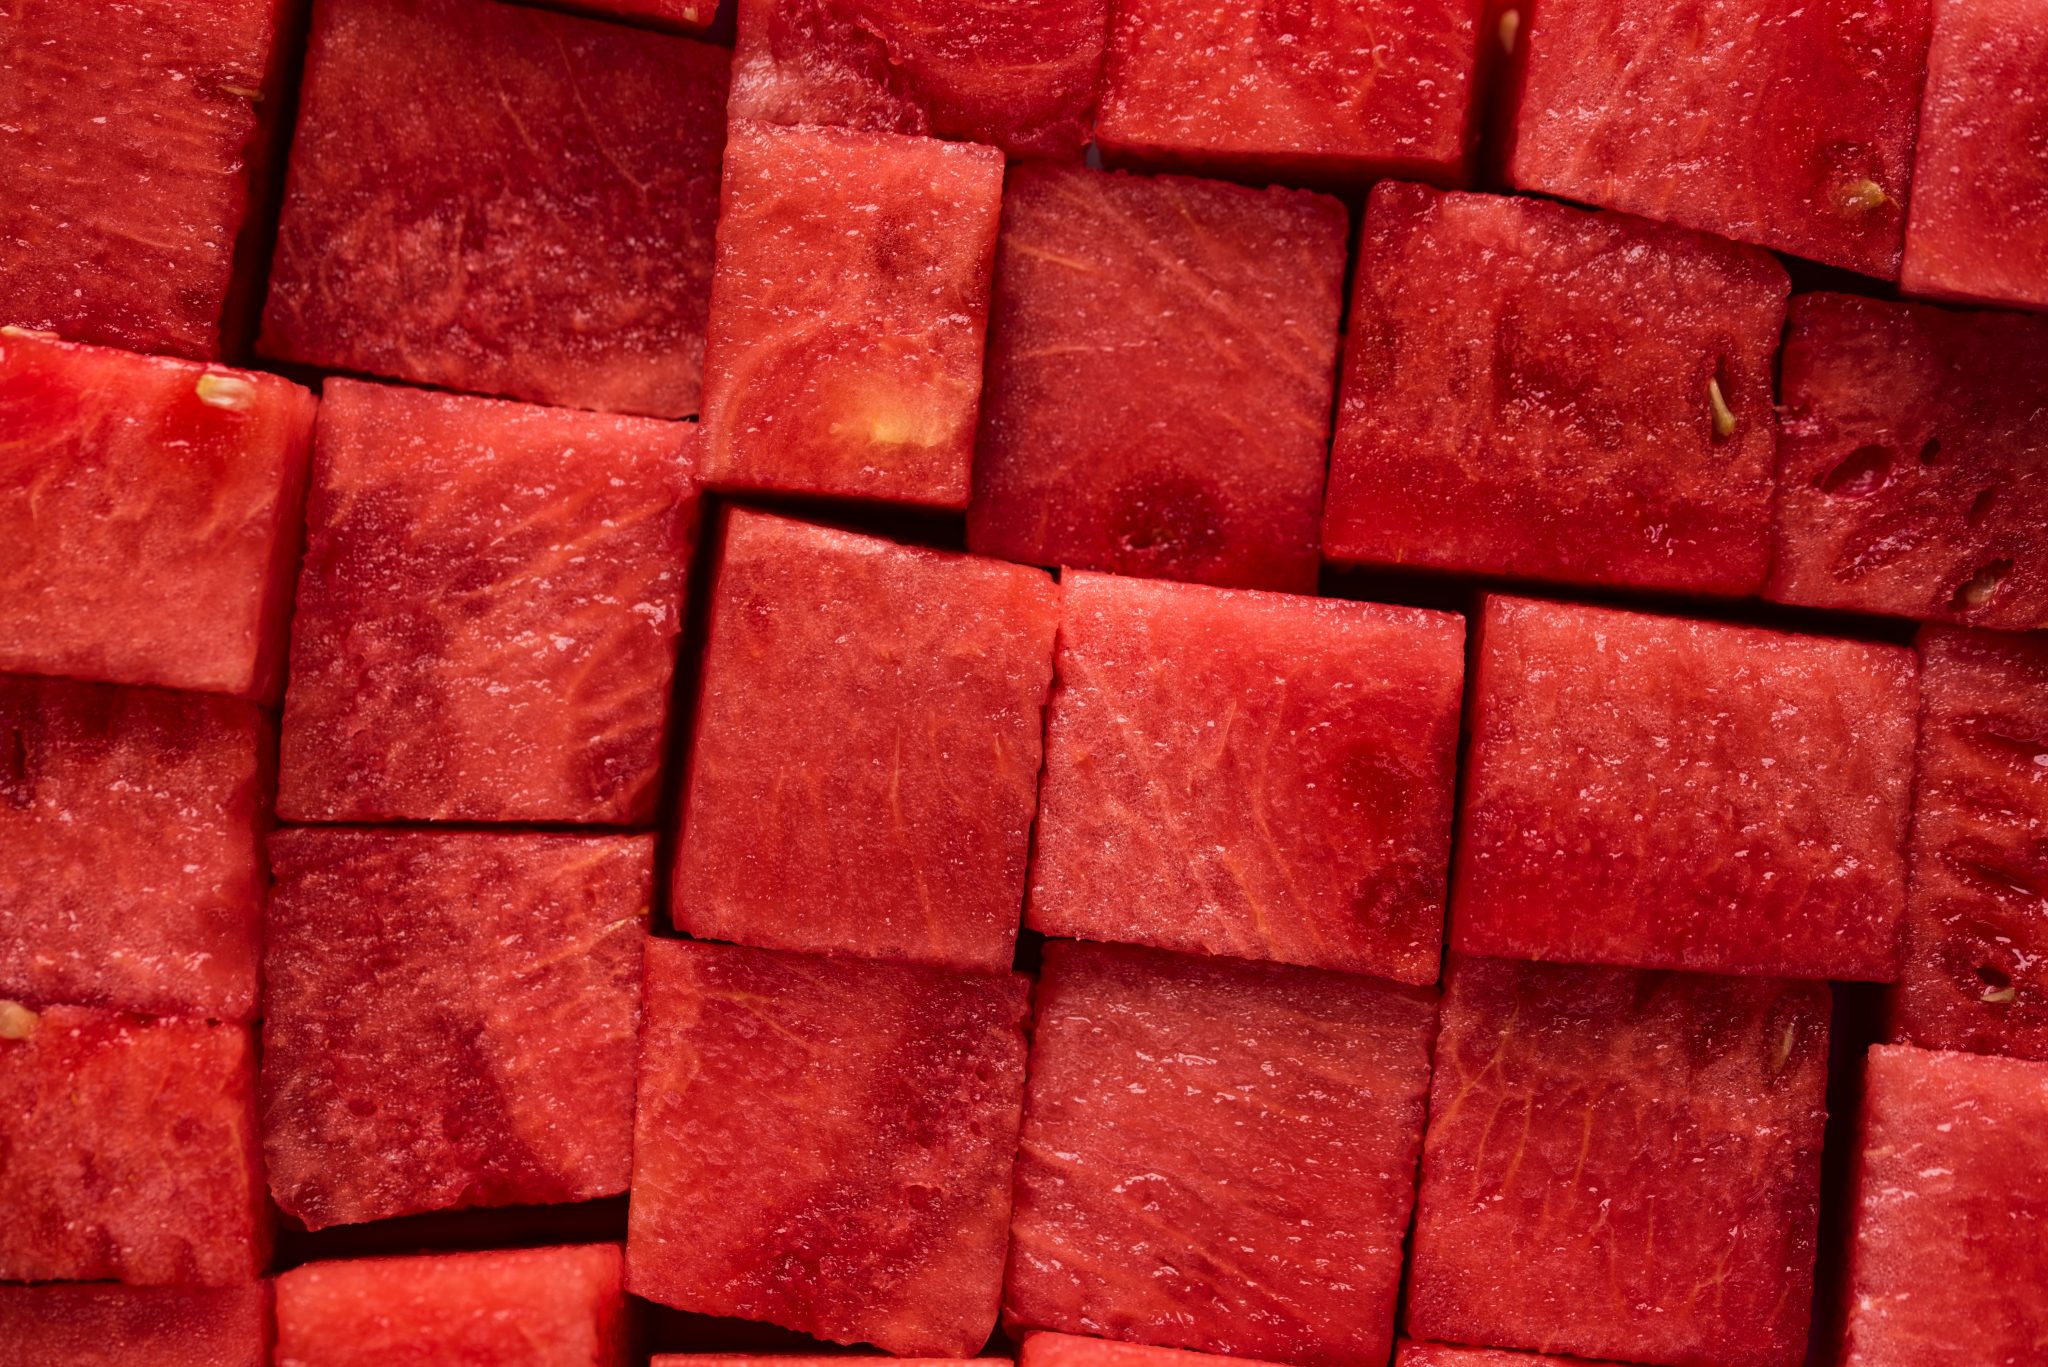 Fruits like watermelon supply the body with glutathione, which is crucial for egg quality